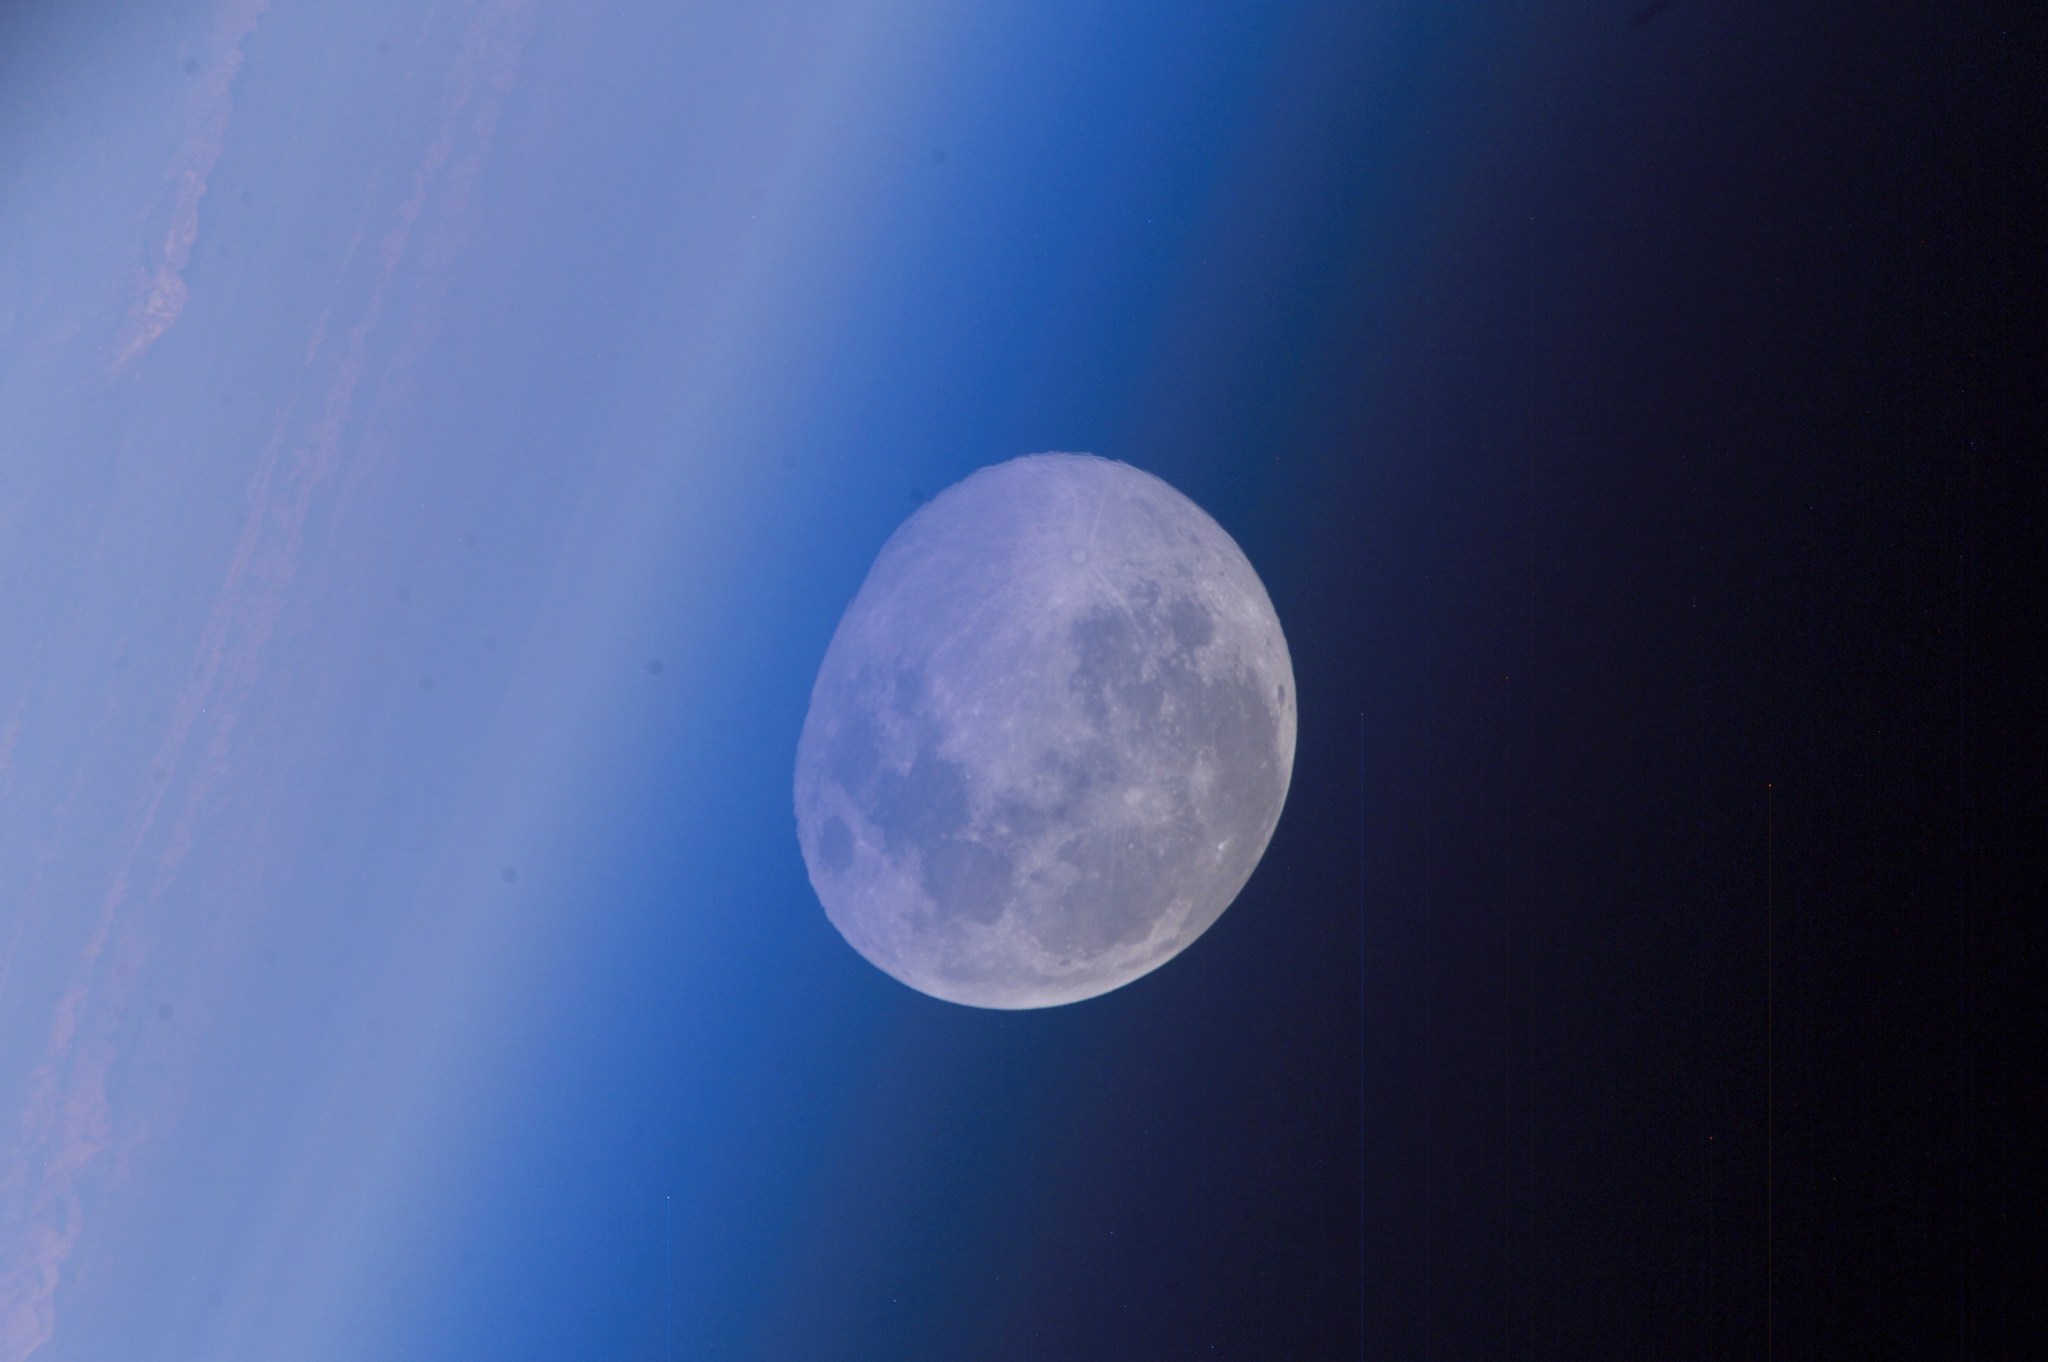 This distorted view of a full moon intersecting Earth's horizon was photographed by an Expedition 14 crewmember onboard the International Space Station.